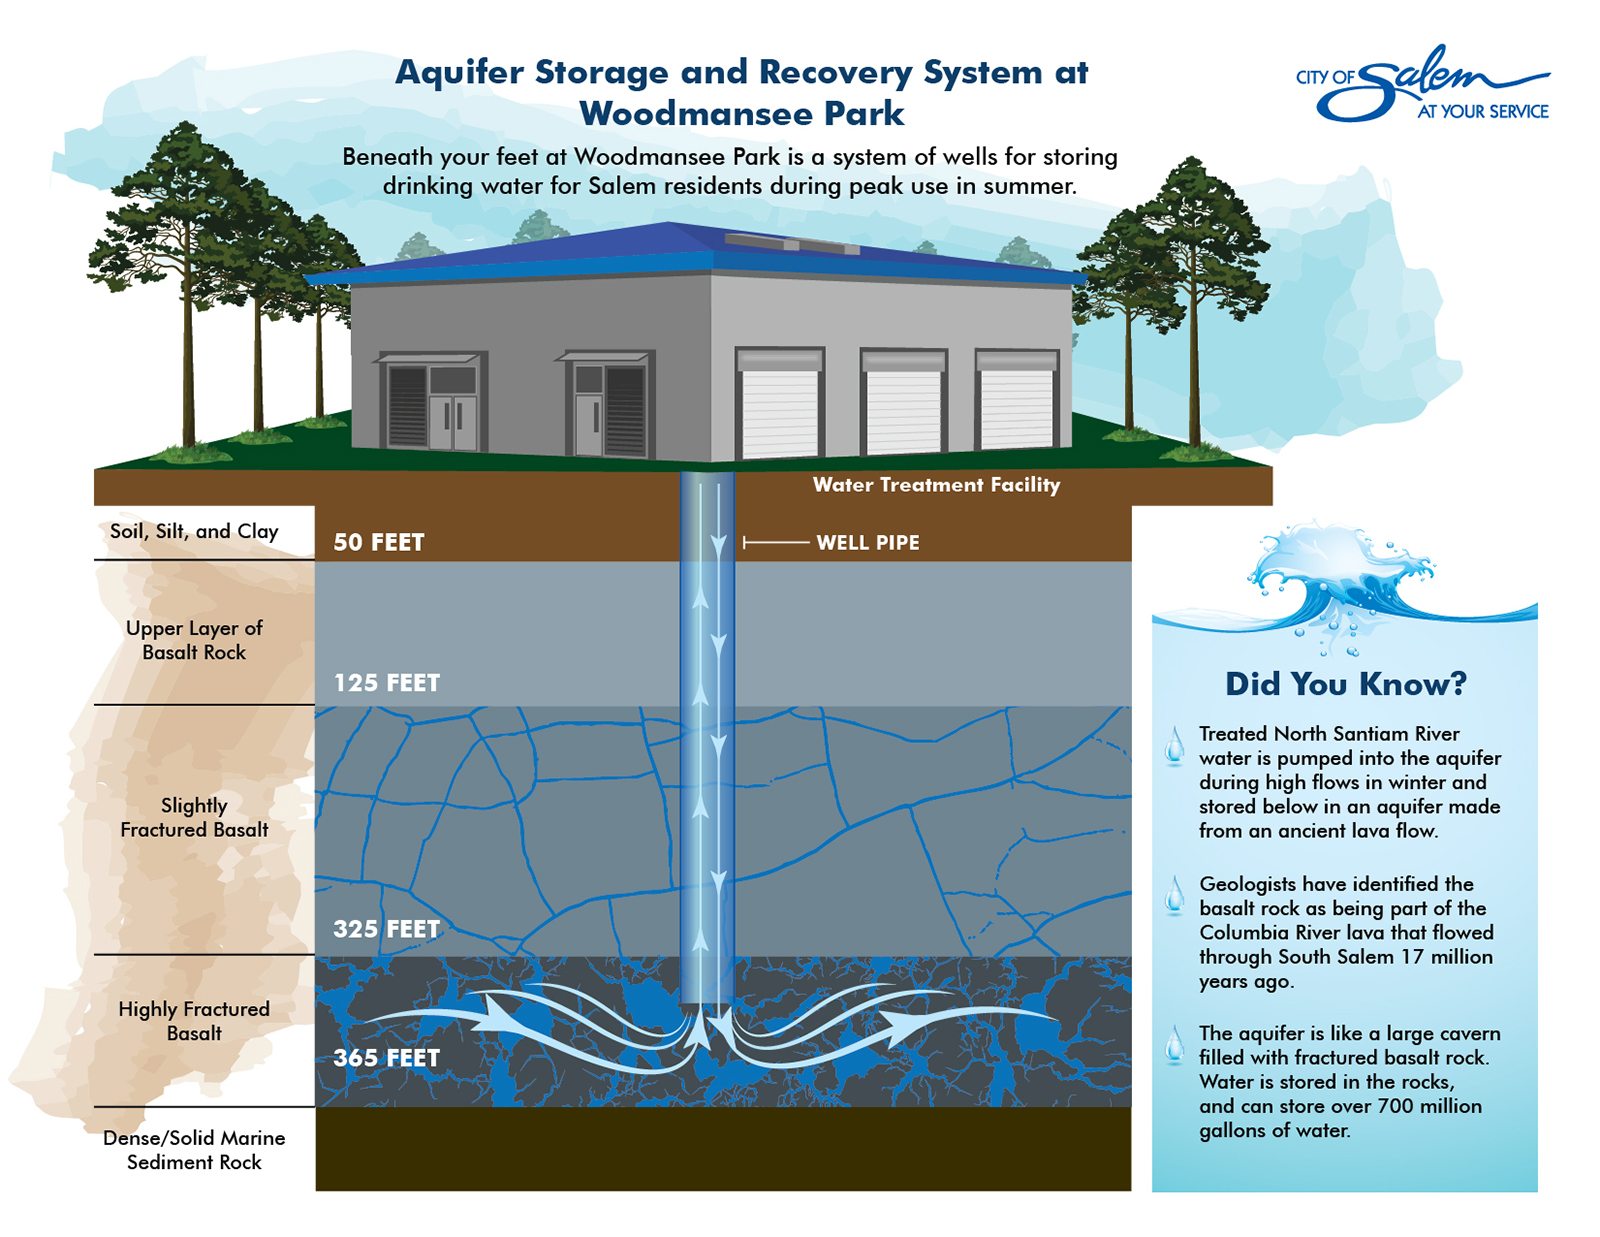 Example Aquifer Storage and Recovery System